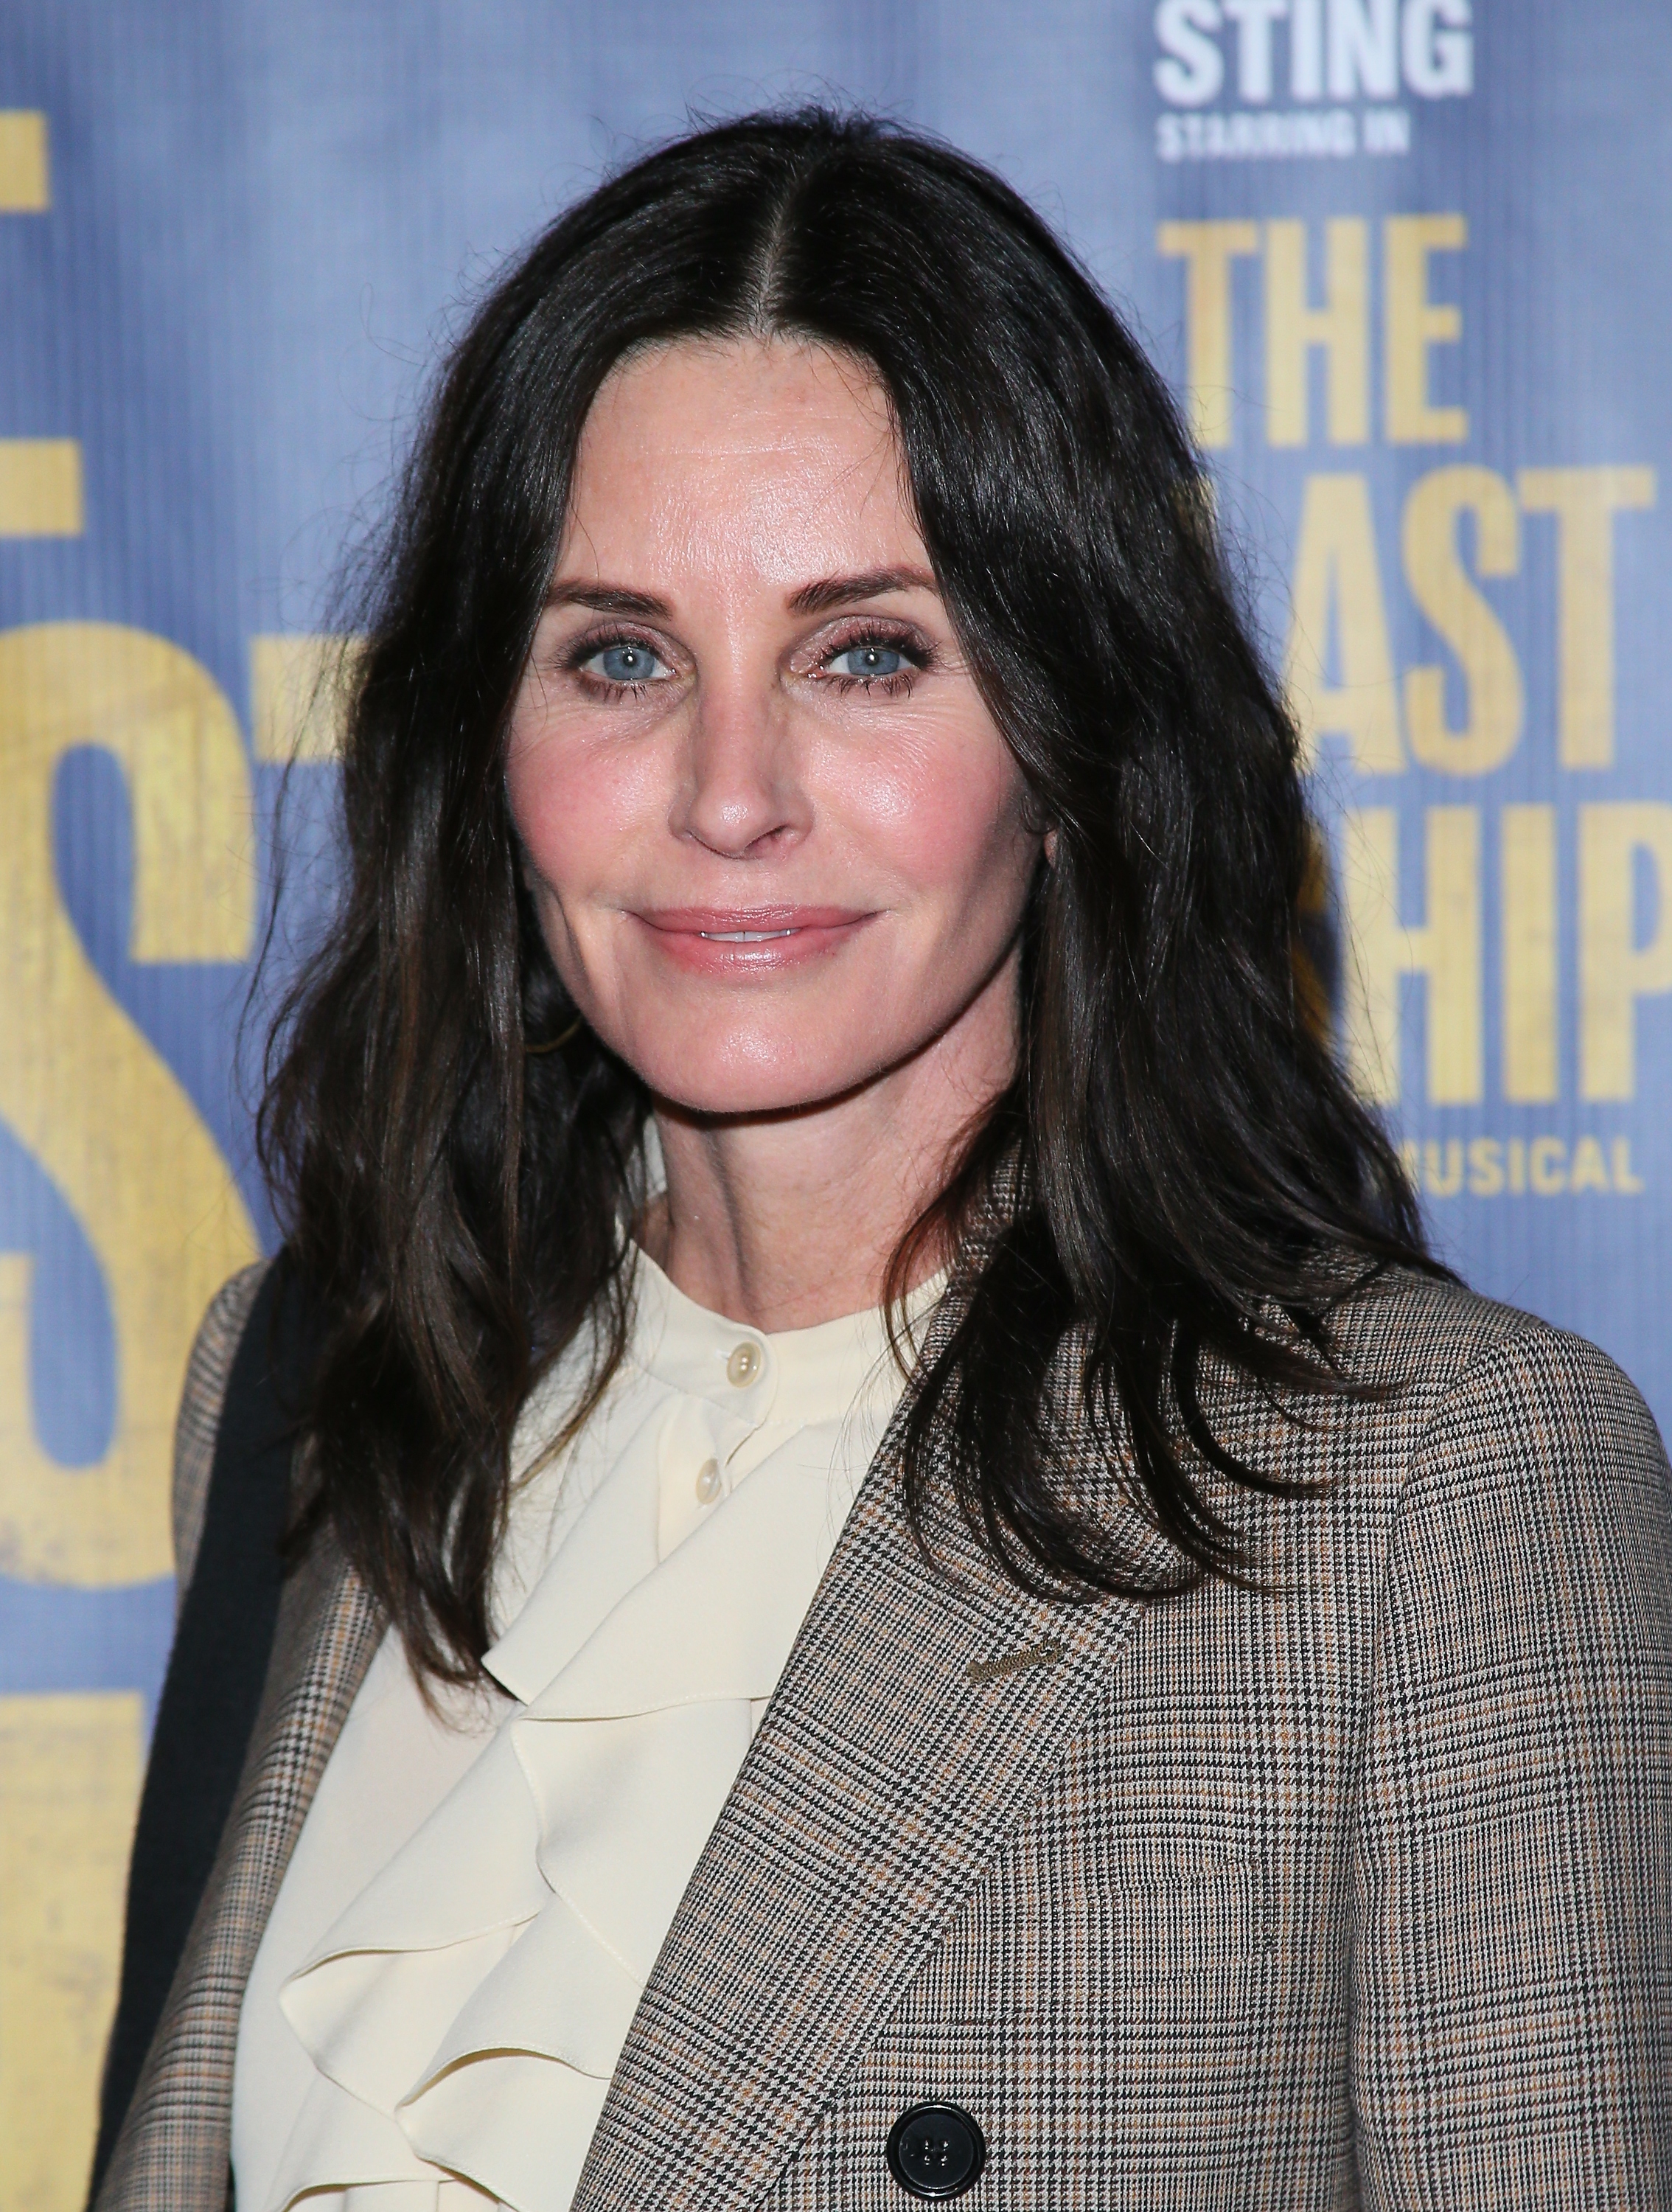 Courteney Cox during The Last Ship Opening Night Performance on January 22, 2020, in Los Angeles, California. | Source: Getty Images